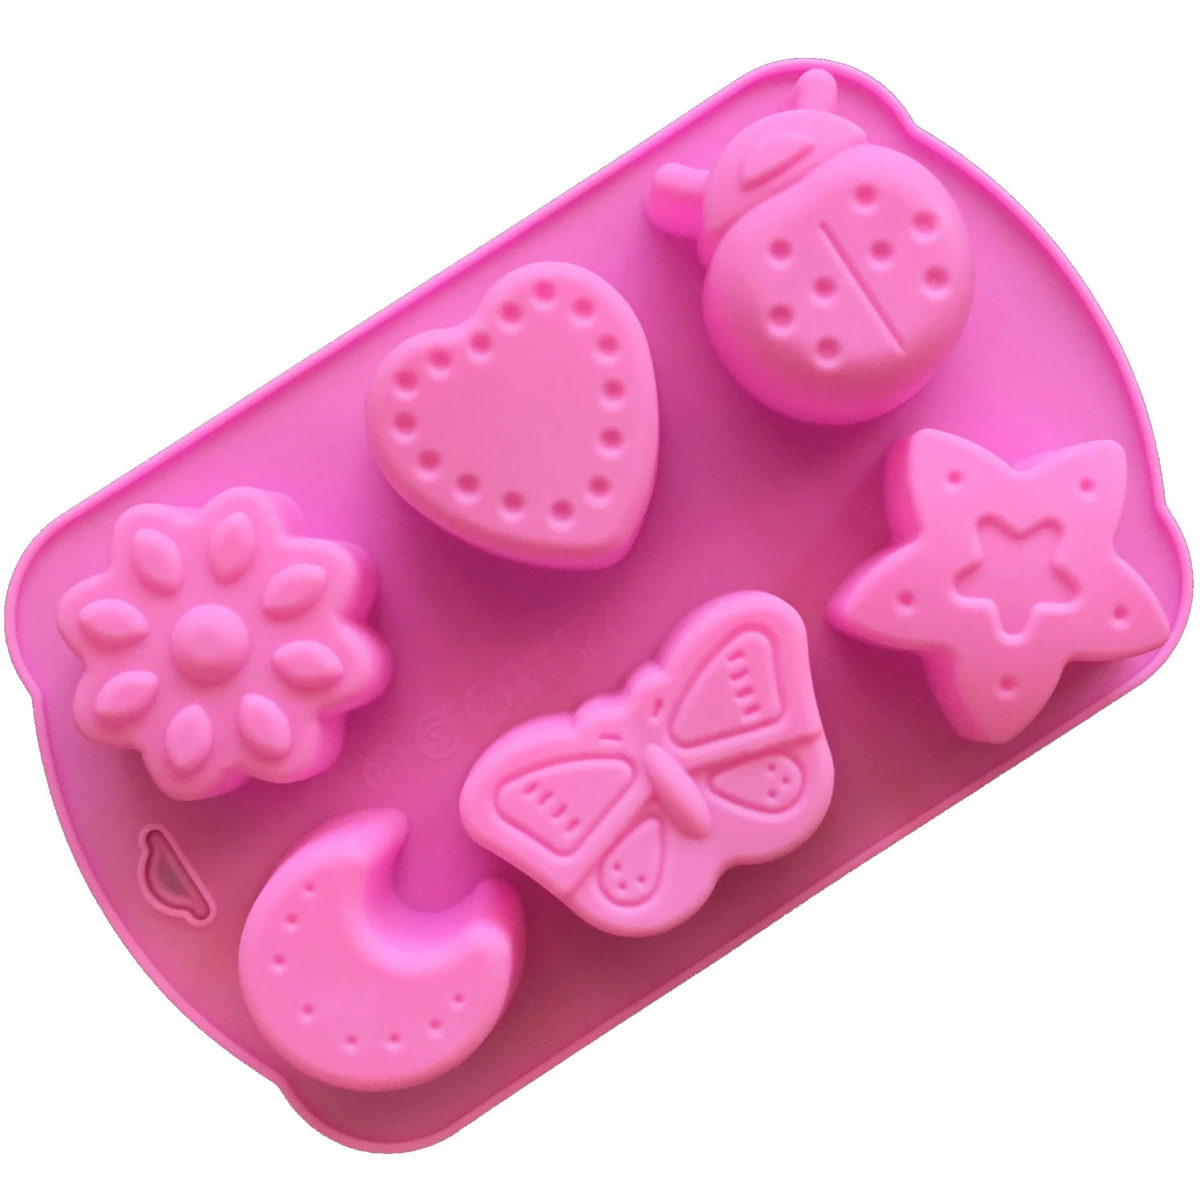 small pink silicone mould with six cavites - flower, heart, ladybug, moon, butterfly and star